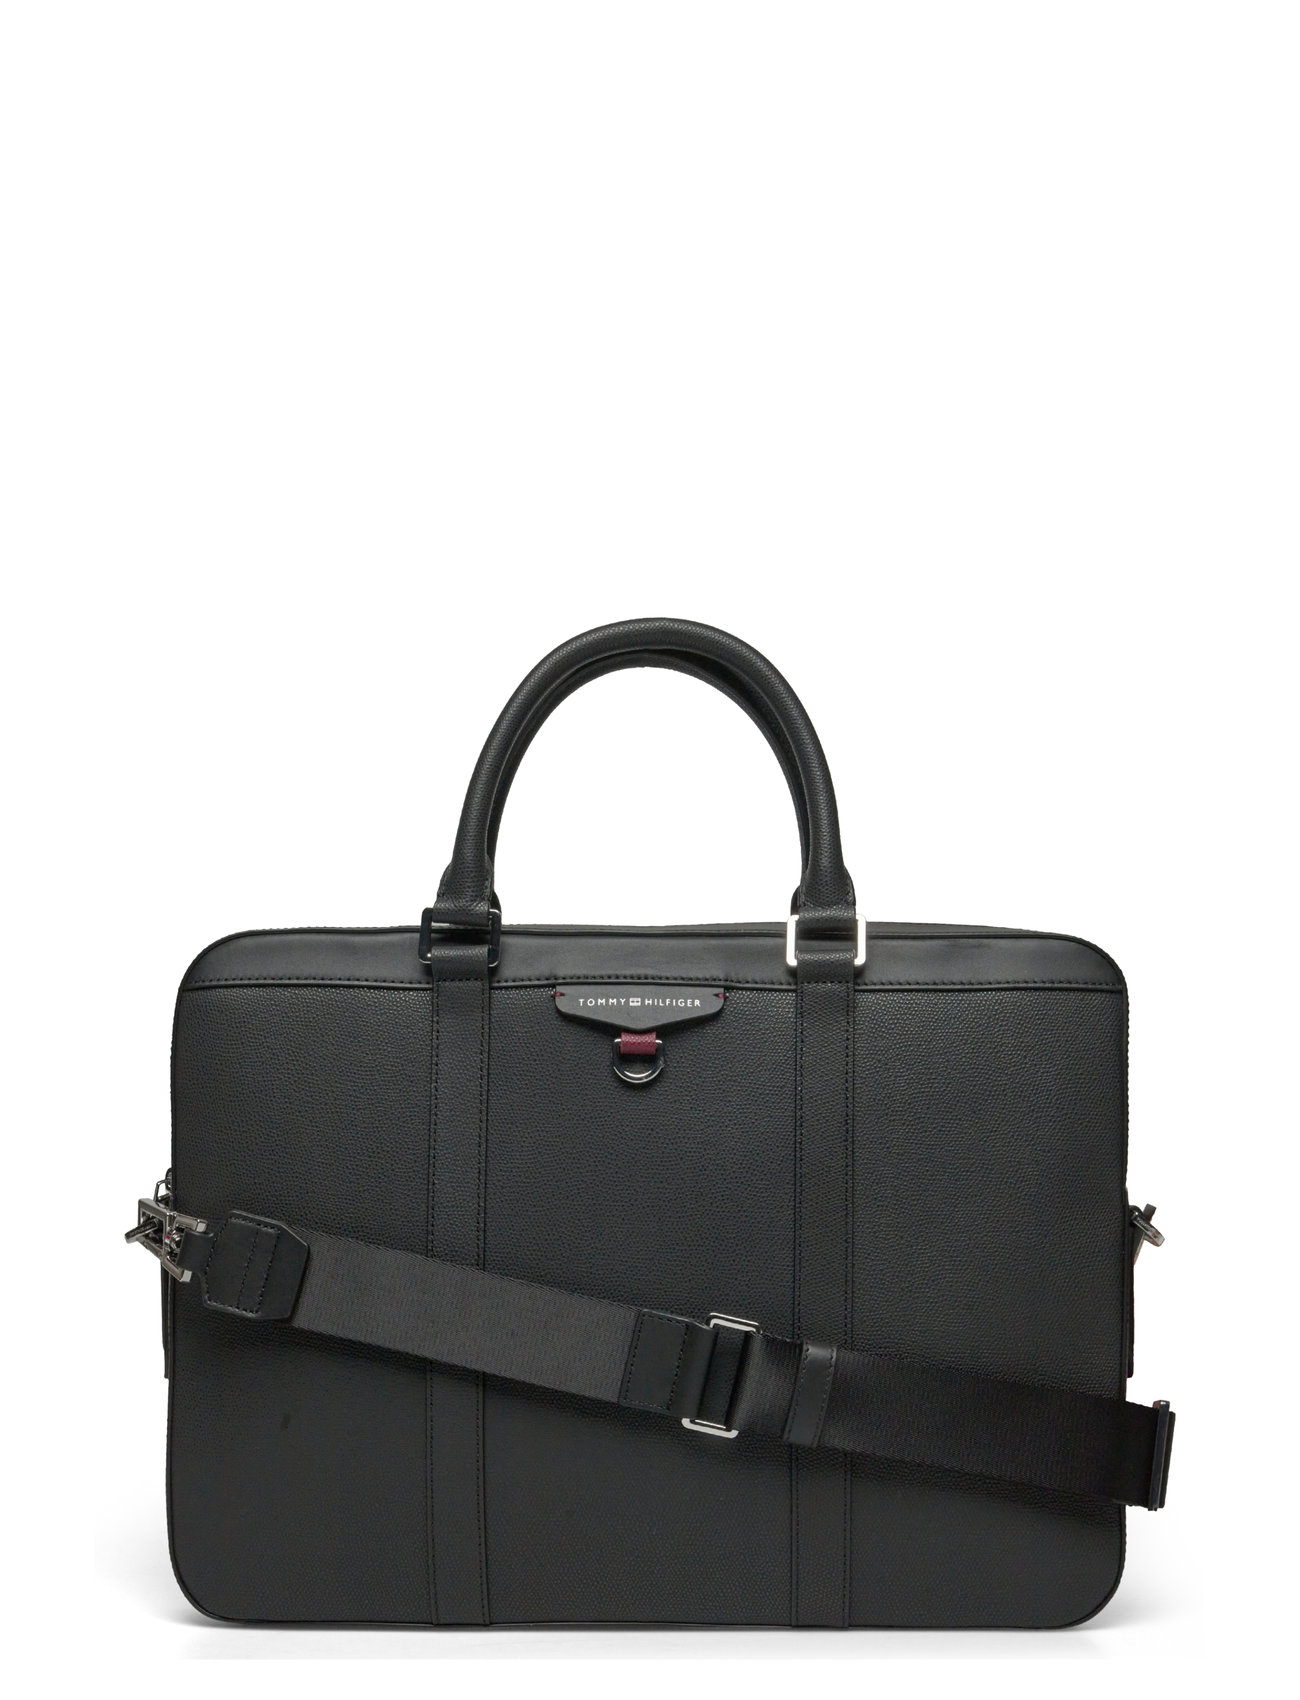 AUXTER Polyester Boss Backpack with laptop Compartment, Capacity: 35 Liters